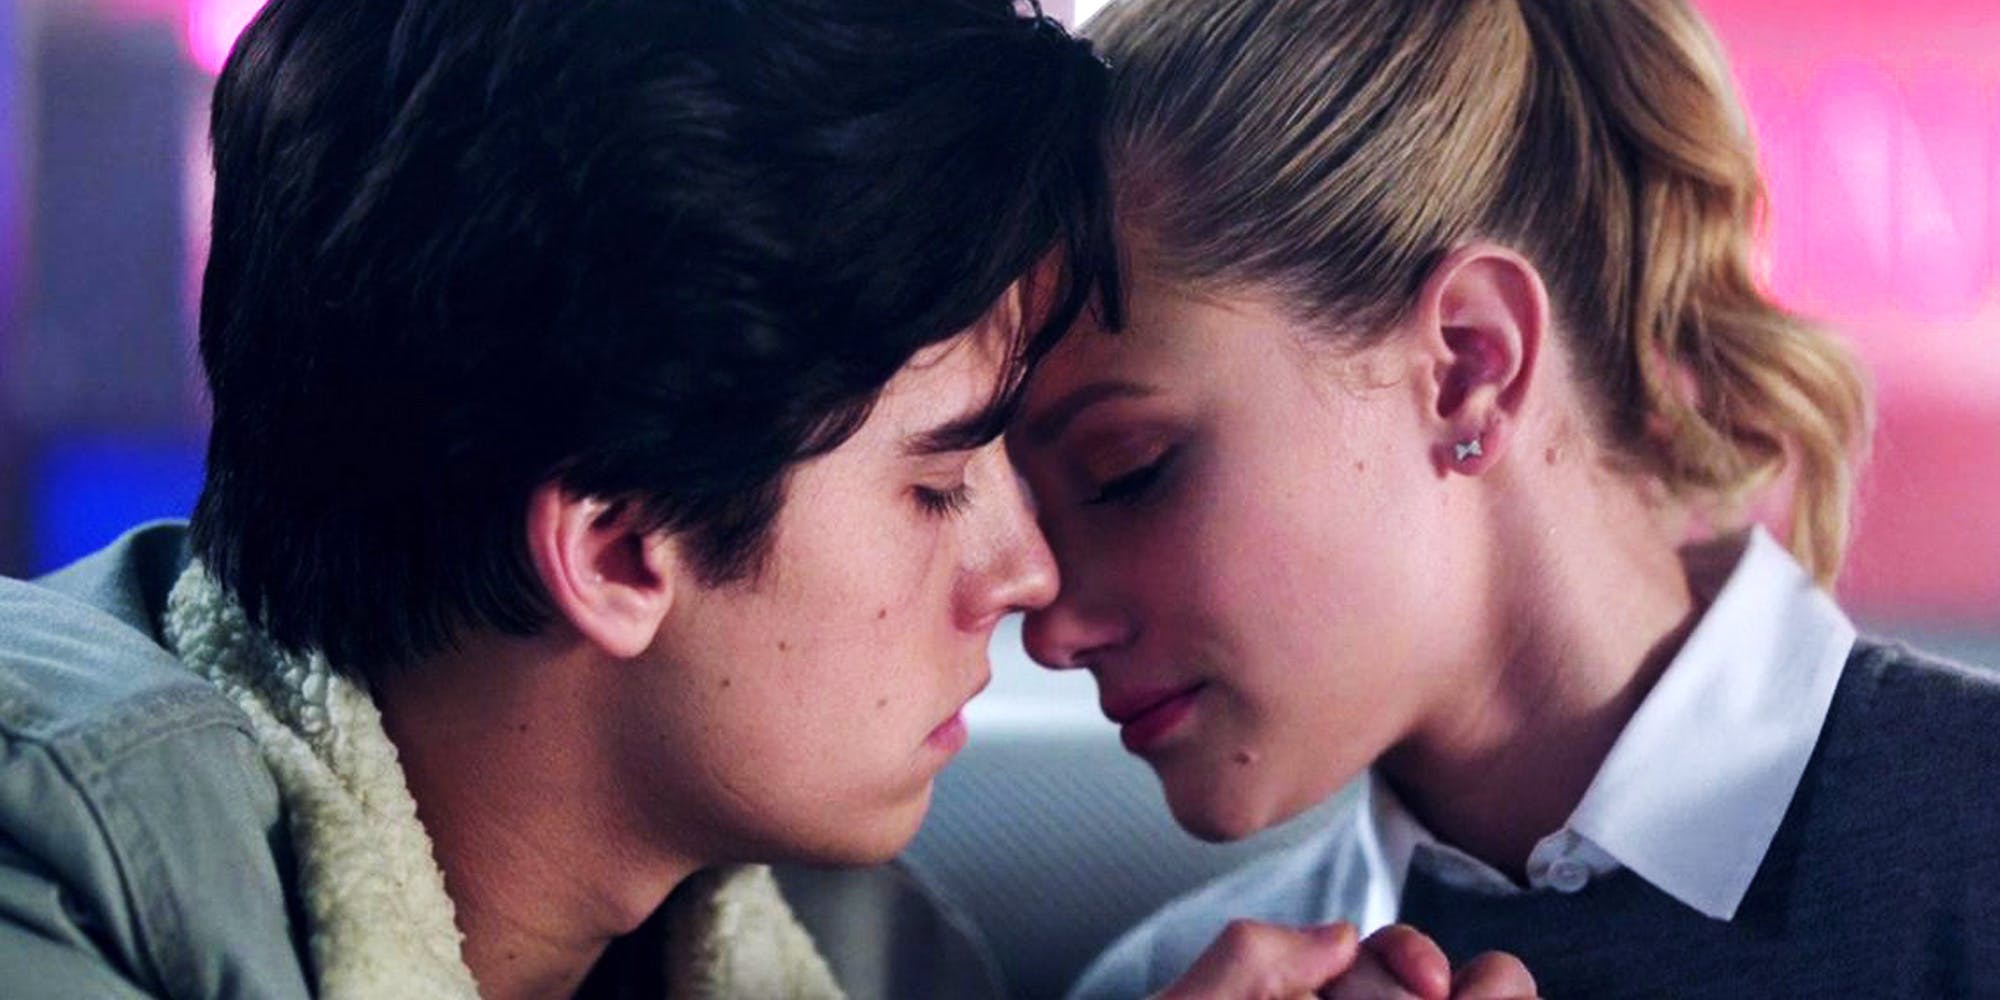 Photo Of Riverdale's Betty & Jughead That Will Make You Swoon